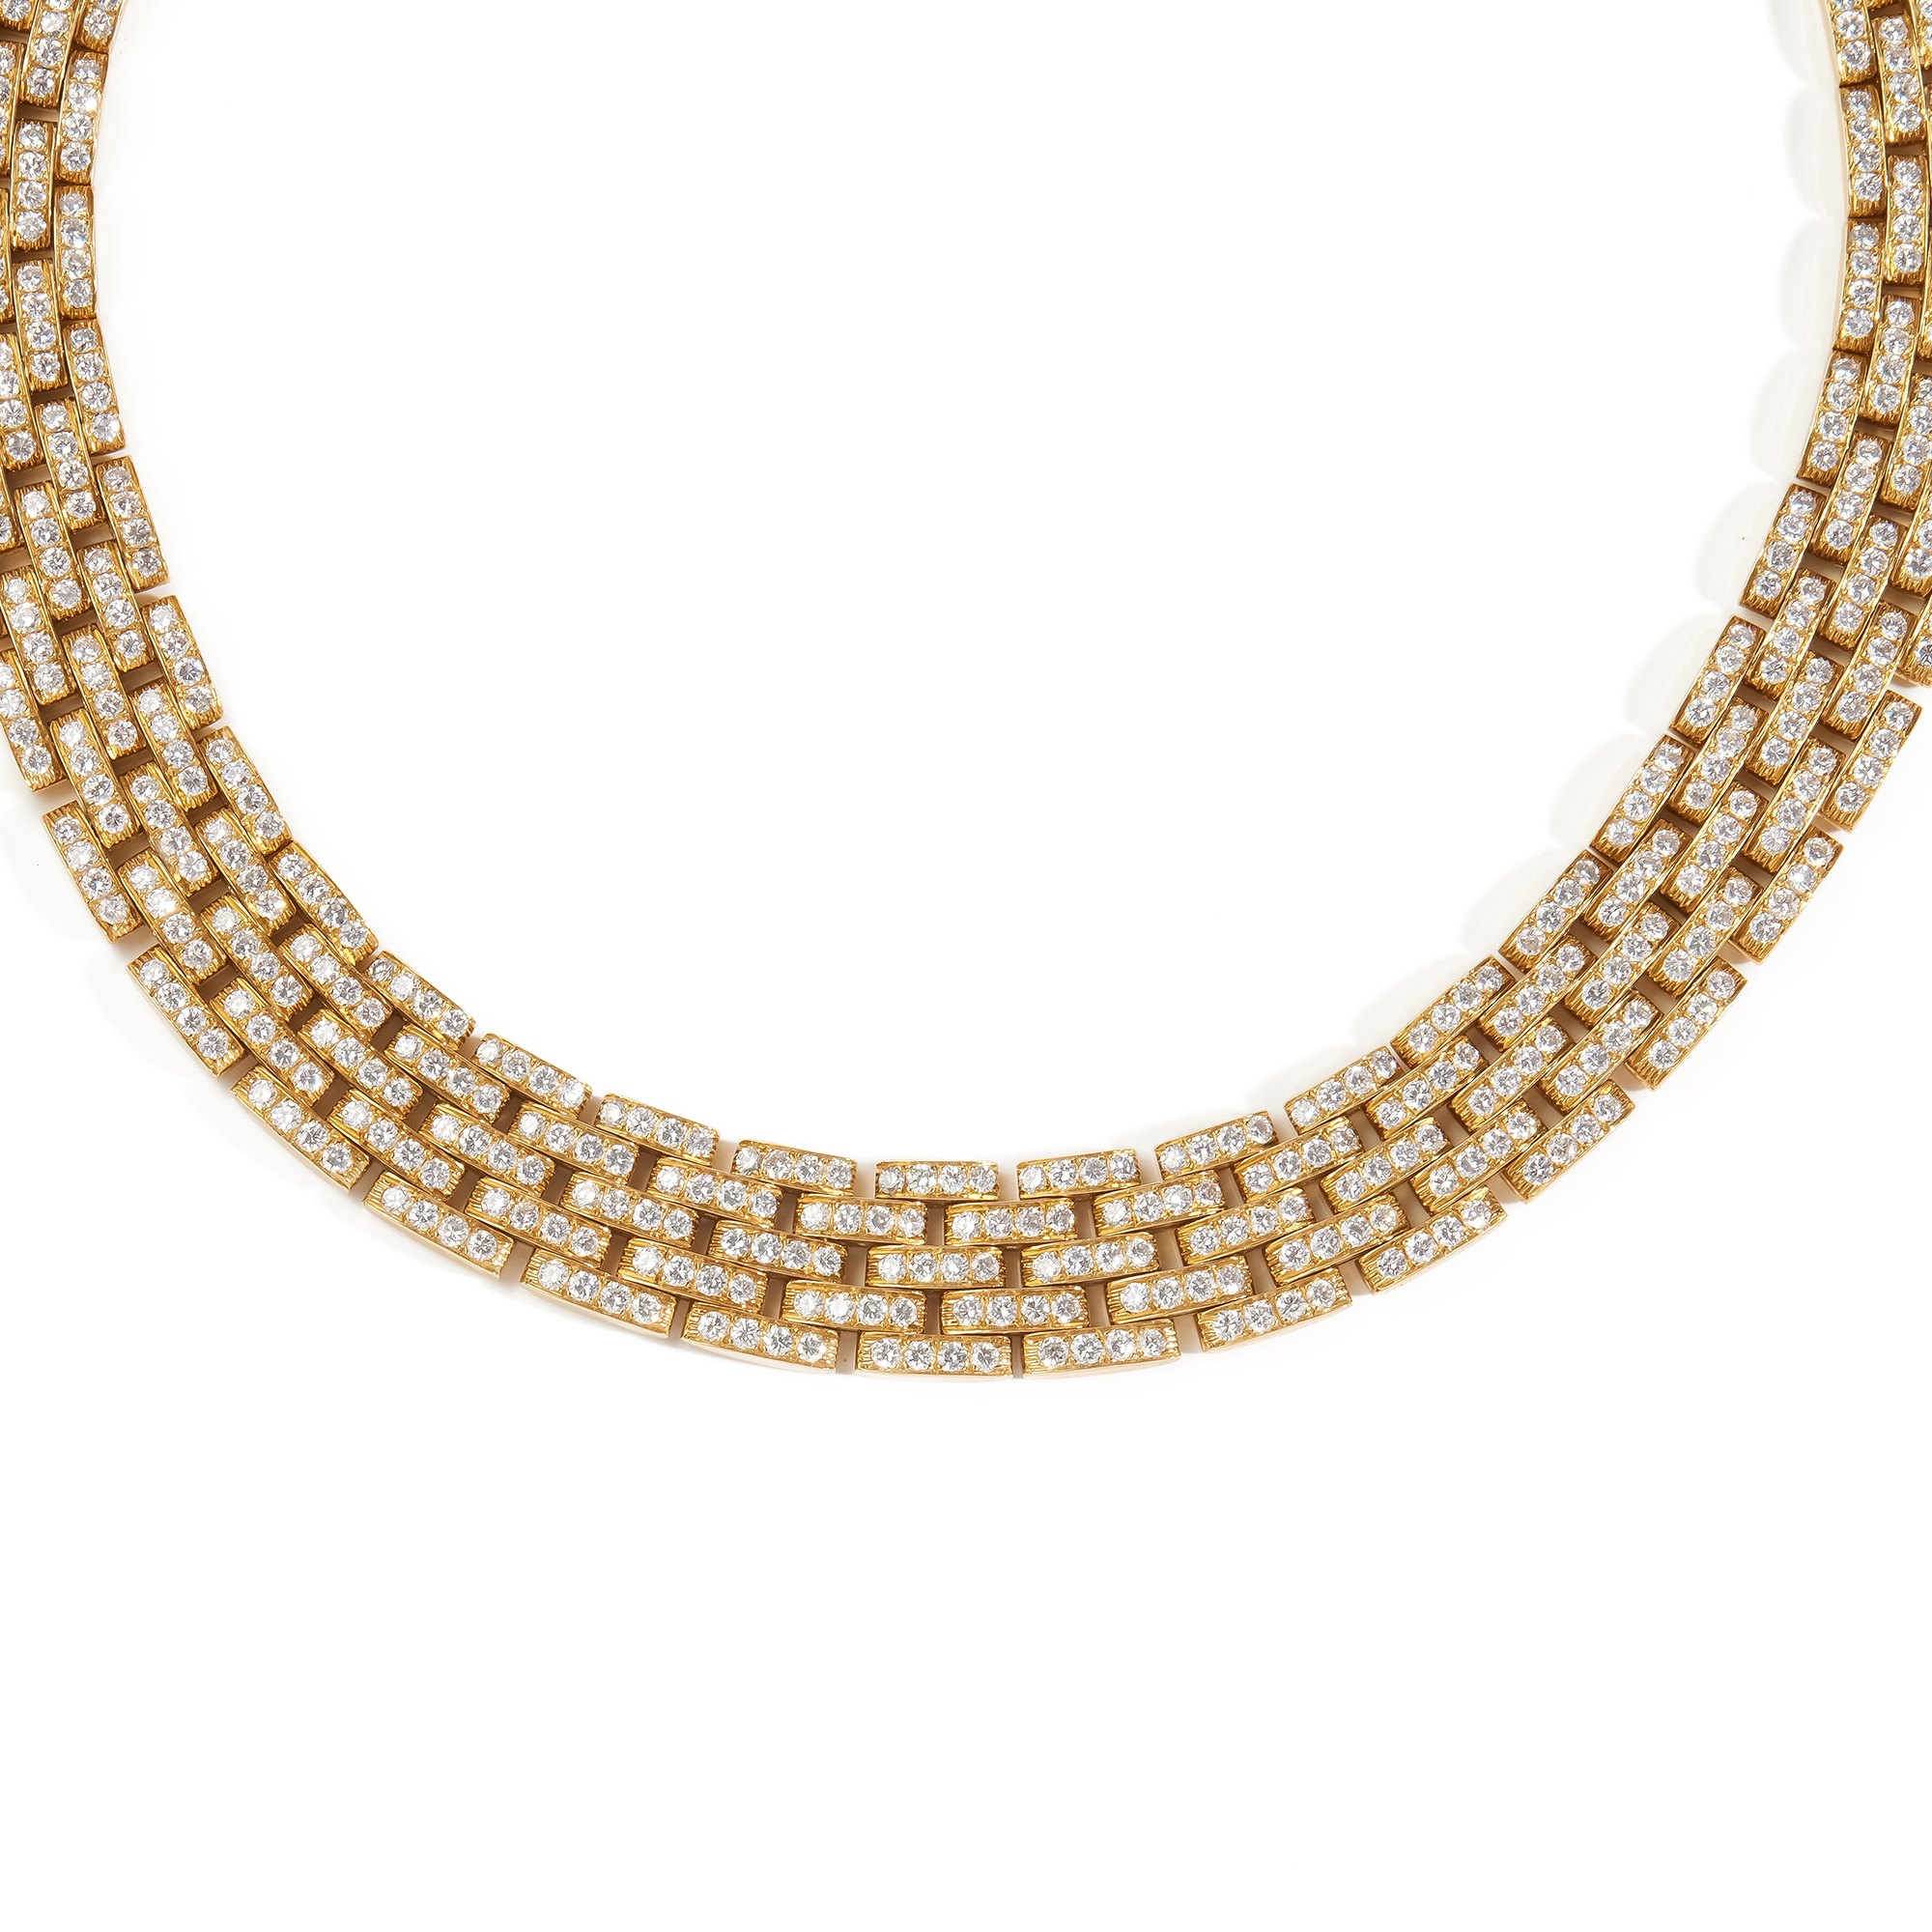 Cartier Maillon Panthere 5 Row Diamond Paved Necklace